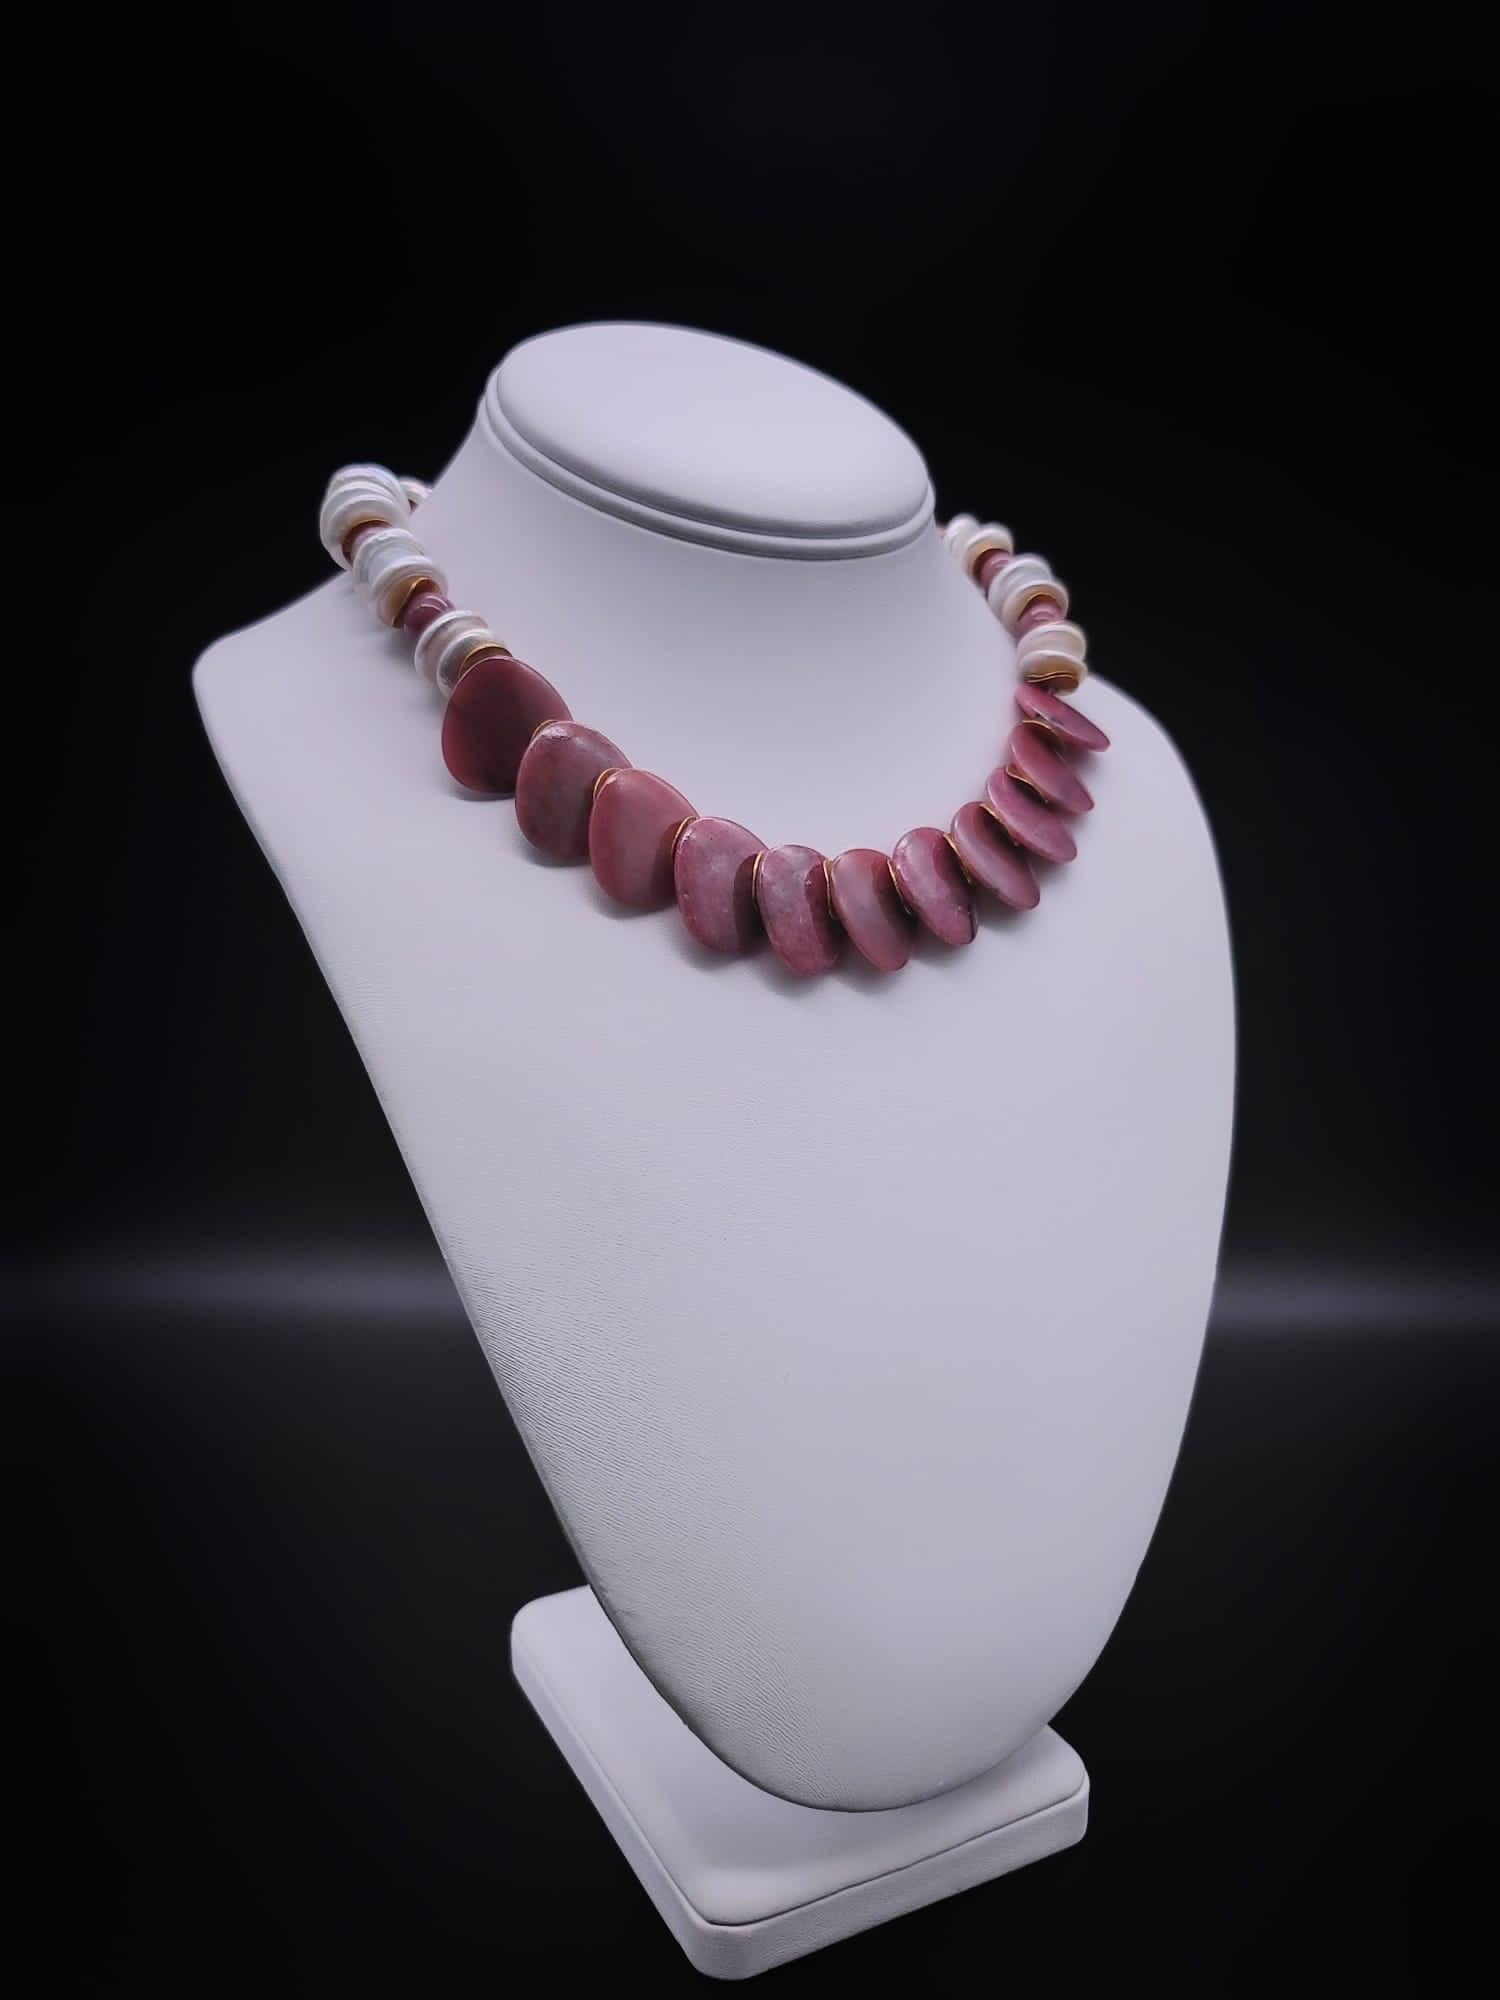 One-of-a-Kind
 Rich rosy colored rhodochrosite 
 Polished, in imaginatively cut tabs forming a bib, hung from a mixed strand of variegated pink and white rhodochrosite beads with 10 m.m coin pearls and vermeil c.z rondels. The clasp is vintage glass